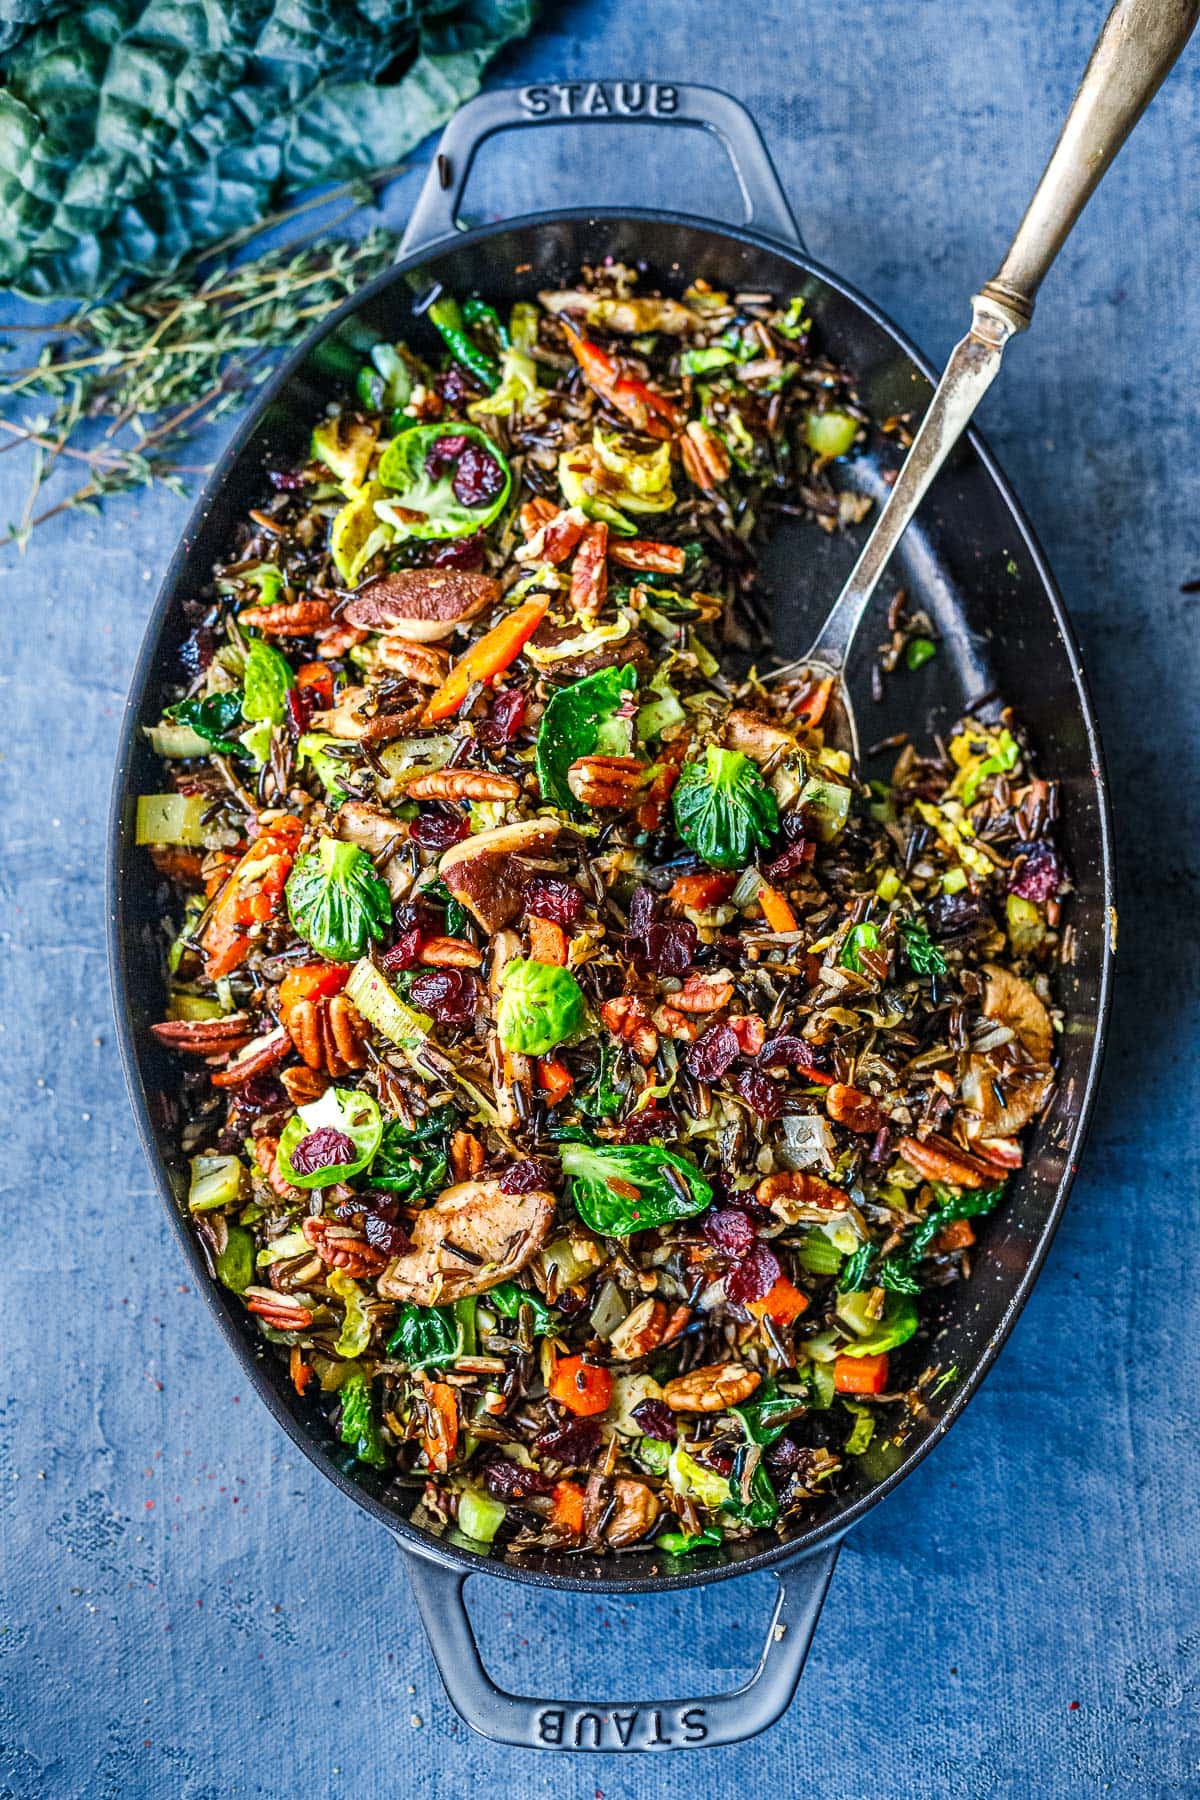 This Wild Rice Pilaf recipe is hearty, textural and savory. Nutty wild rice is paired with mushrooms, pecans, leeks, Brussels sprouts, and craisins. A lovely, colorful side dish that is vegan and gluten-free.